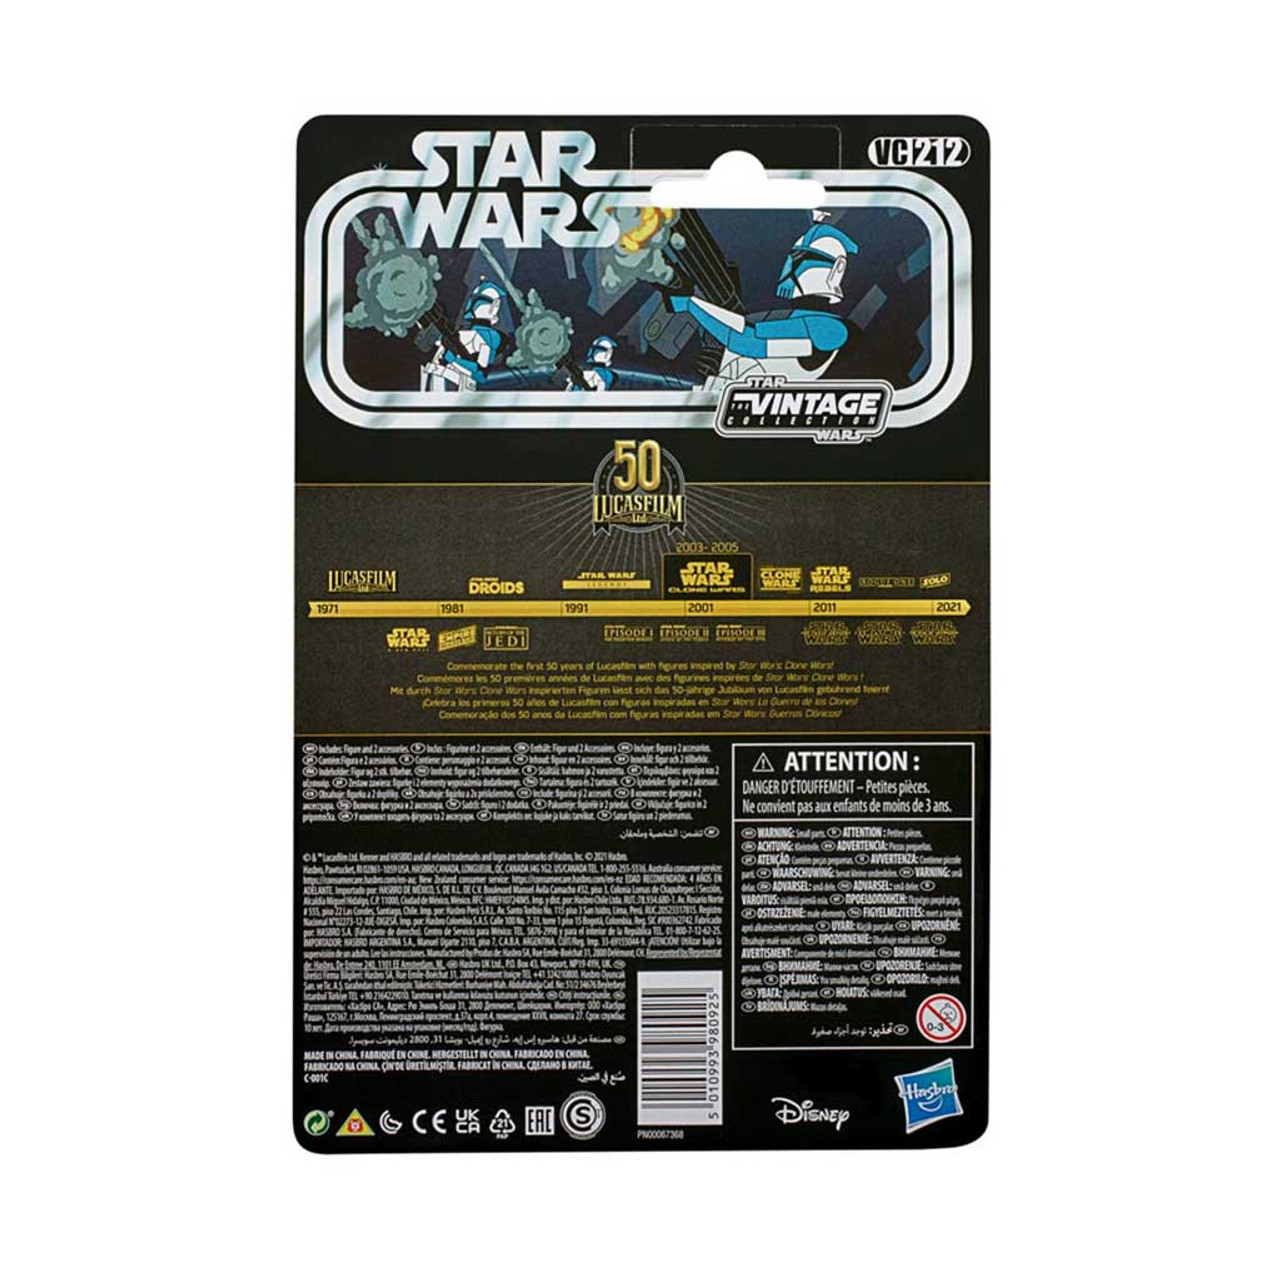  Star Wars The Vintage Collection Clone Wars 3.75 Inch Action  Figure Exclusive - Arc Trooper (Blue) VC212 : Toys & Games